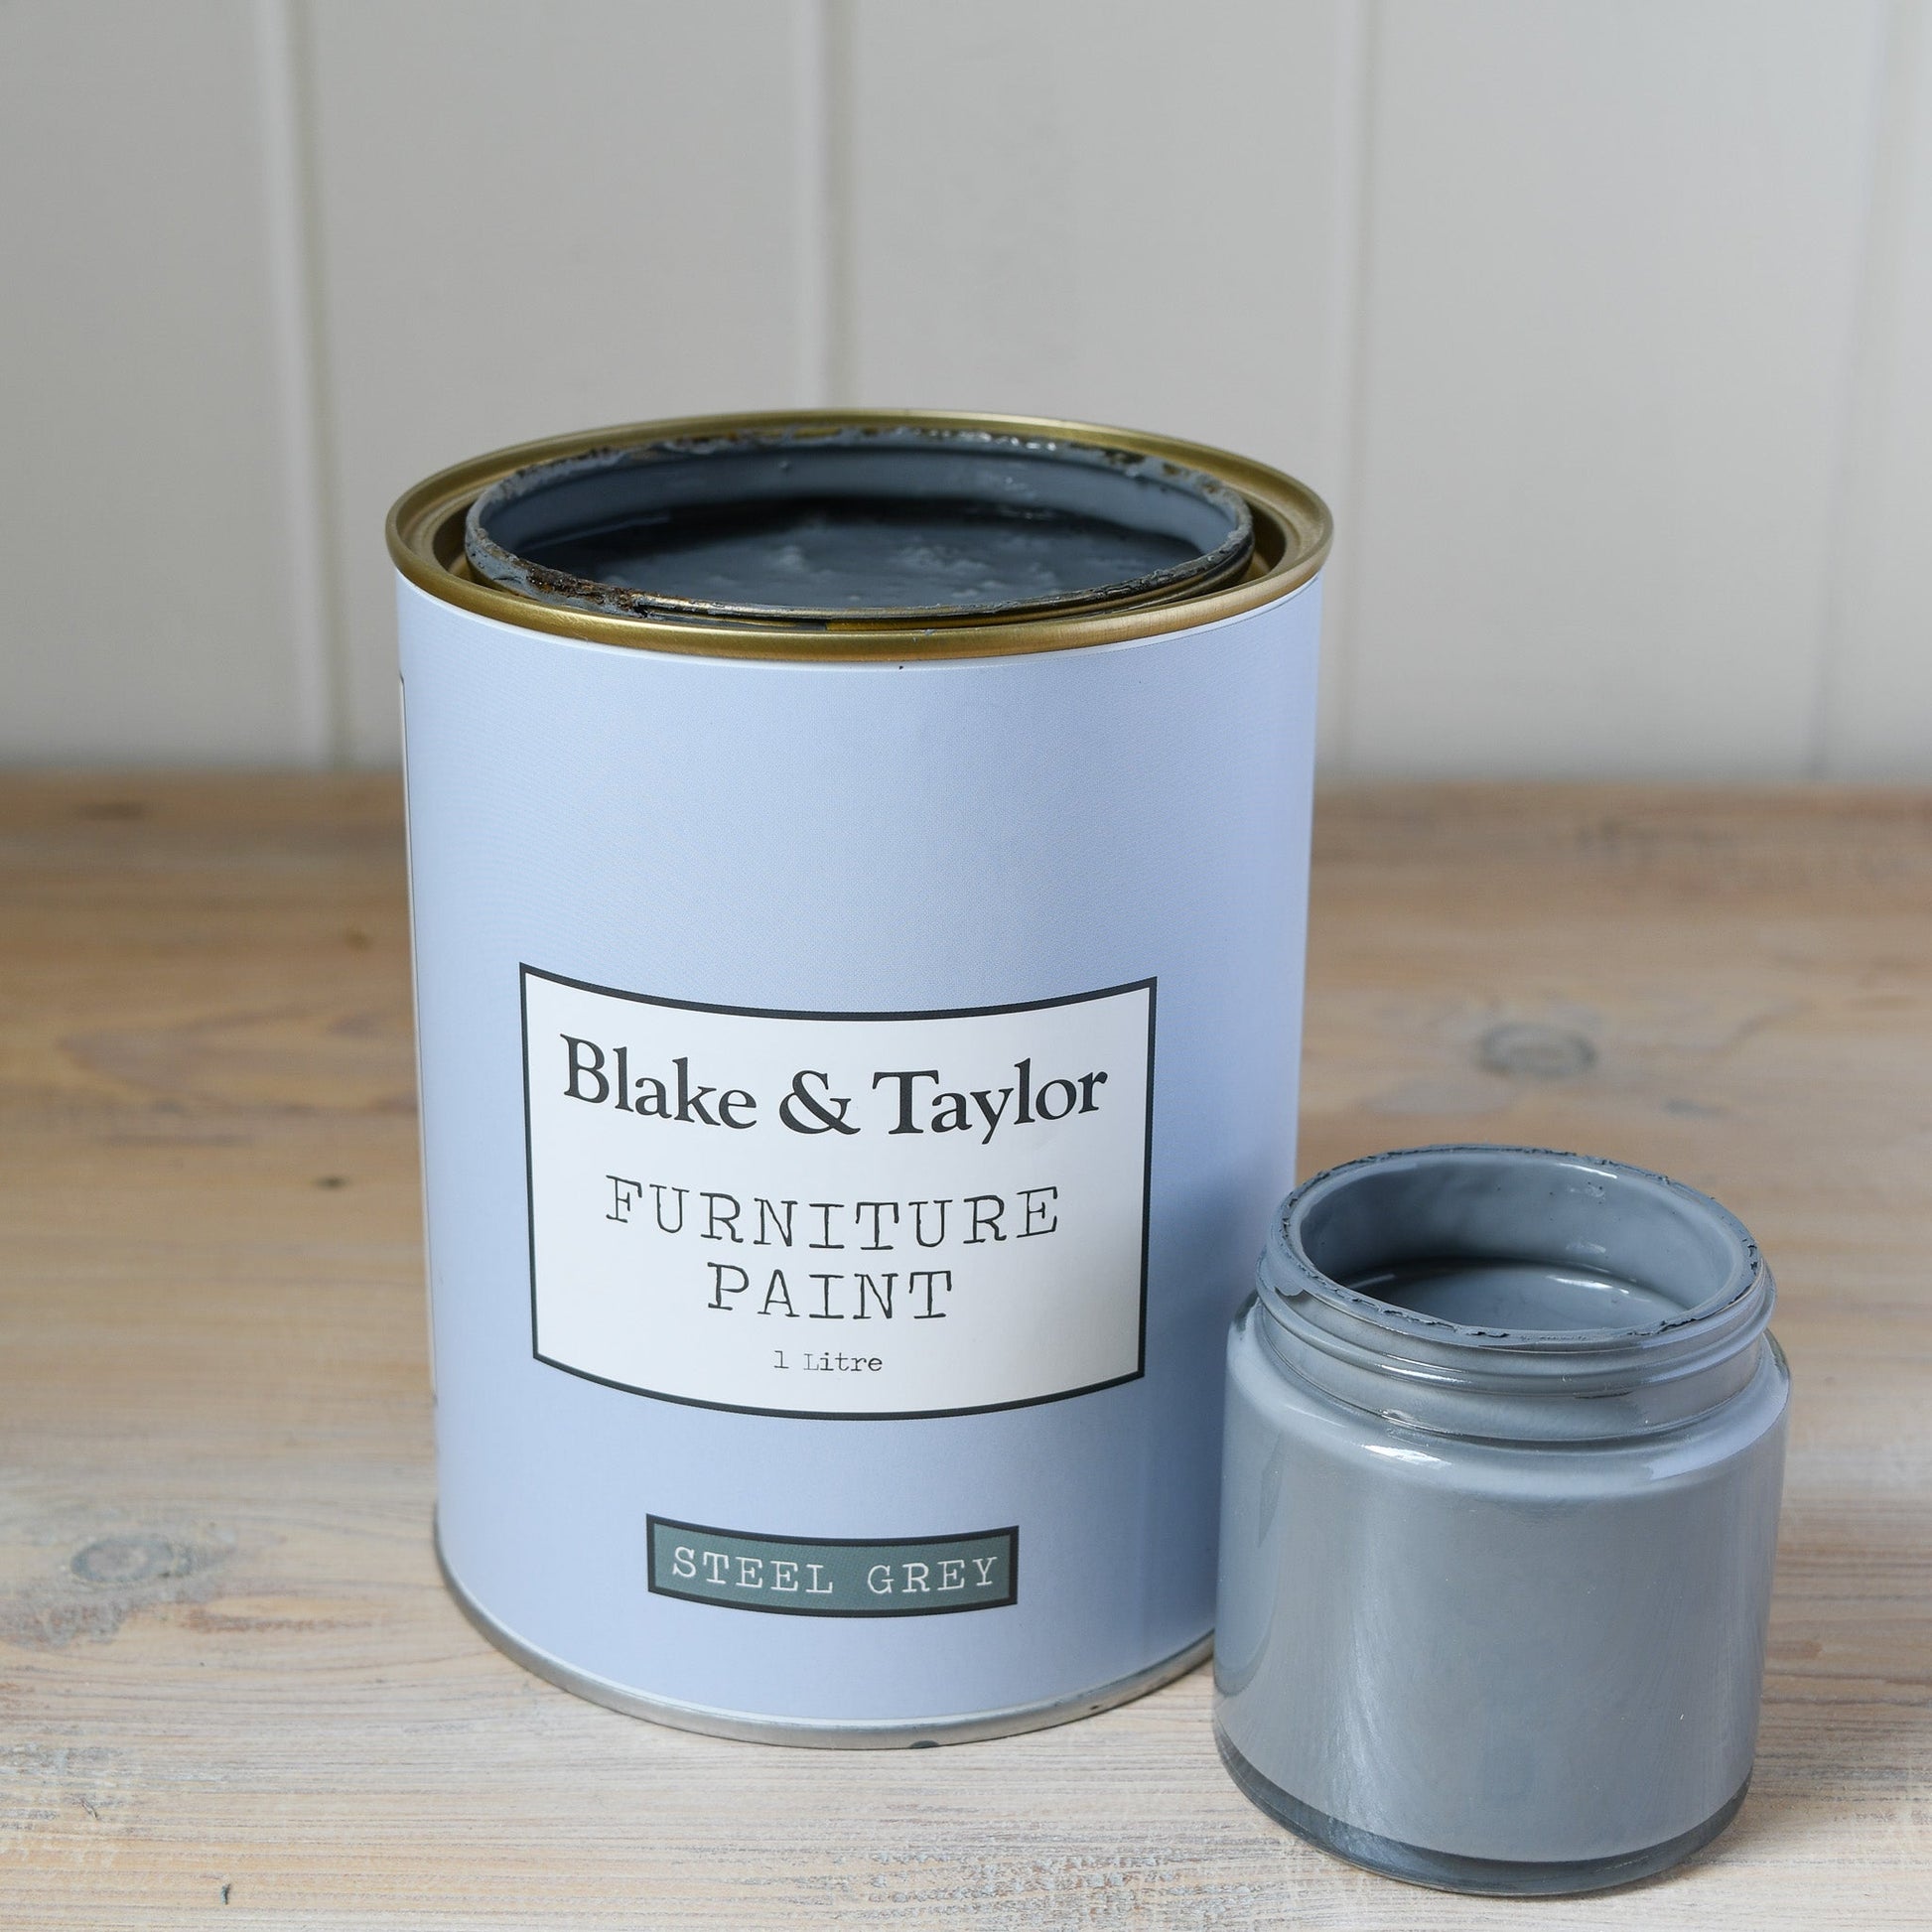 Blake & Taylor Chalk Furniture Paint litre tin and 120ml pot of Steel Grey